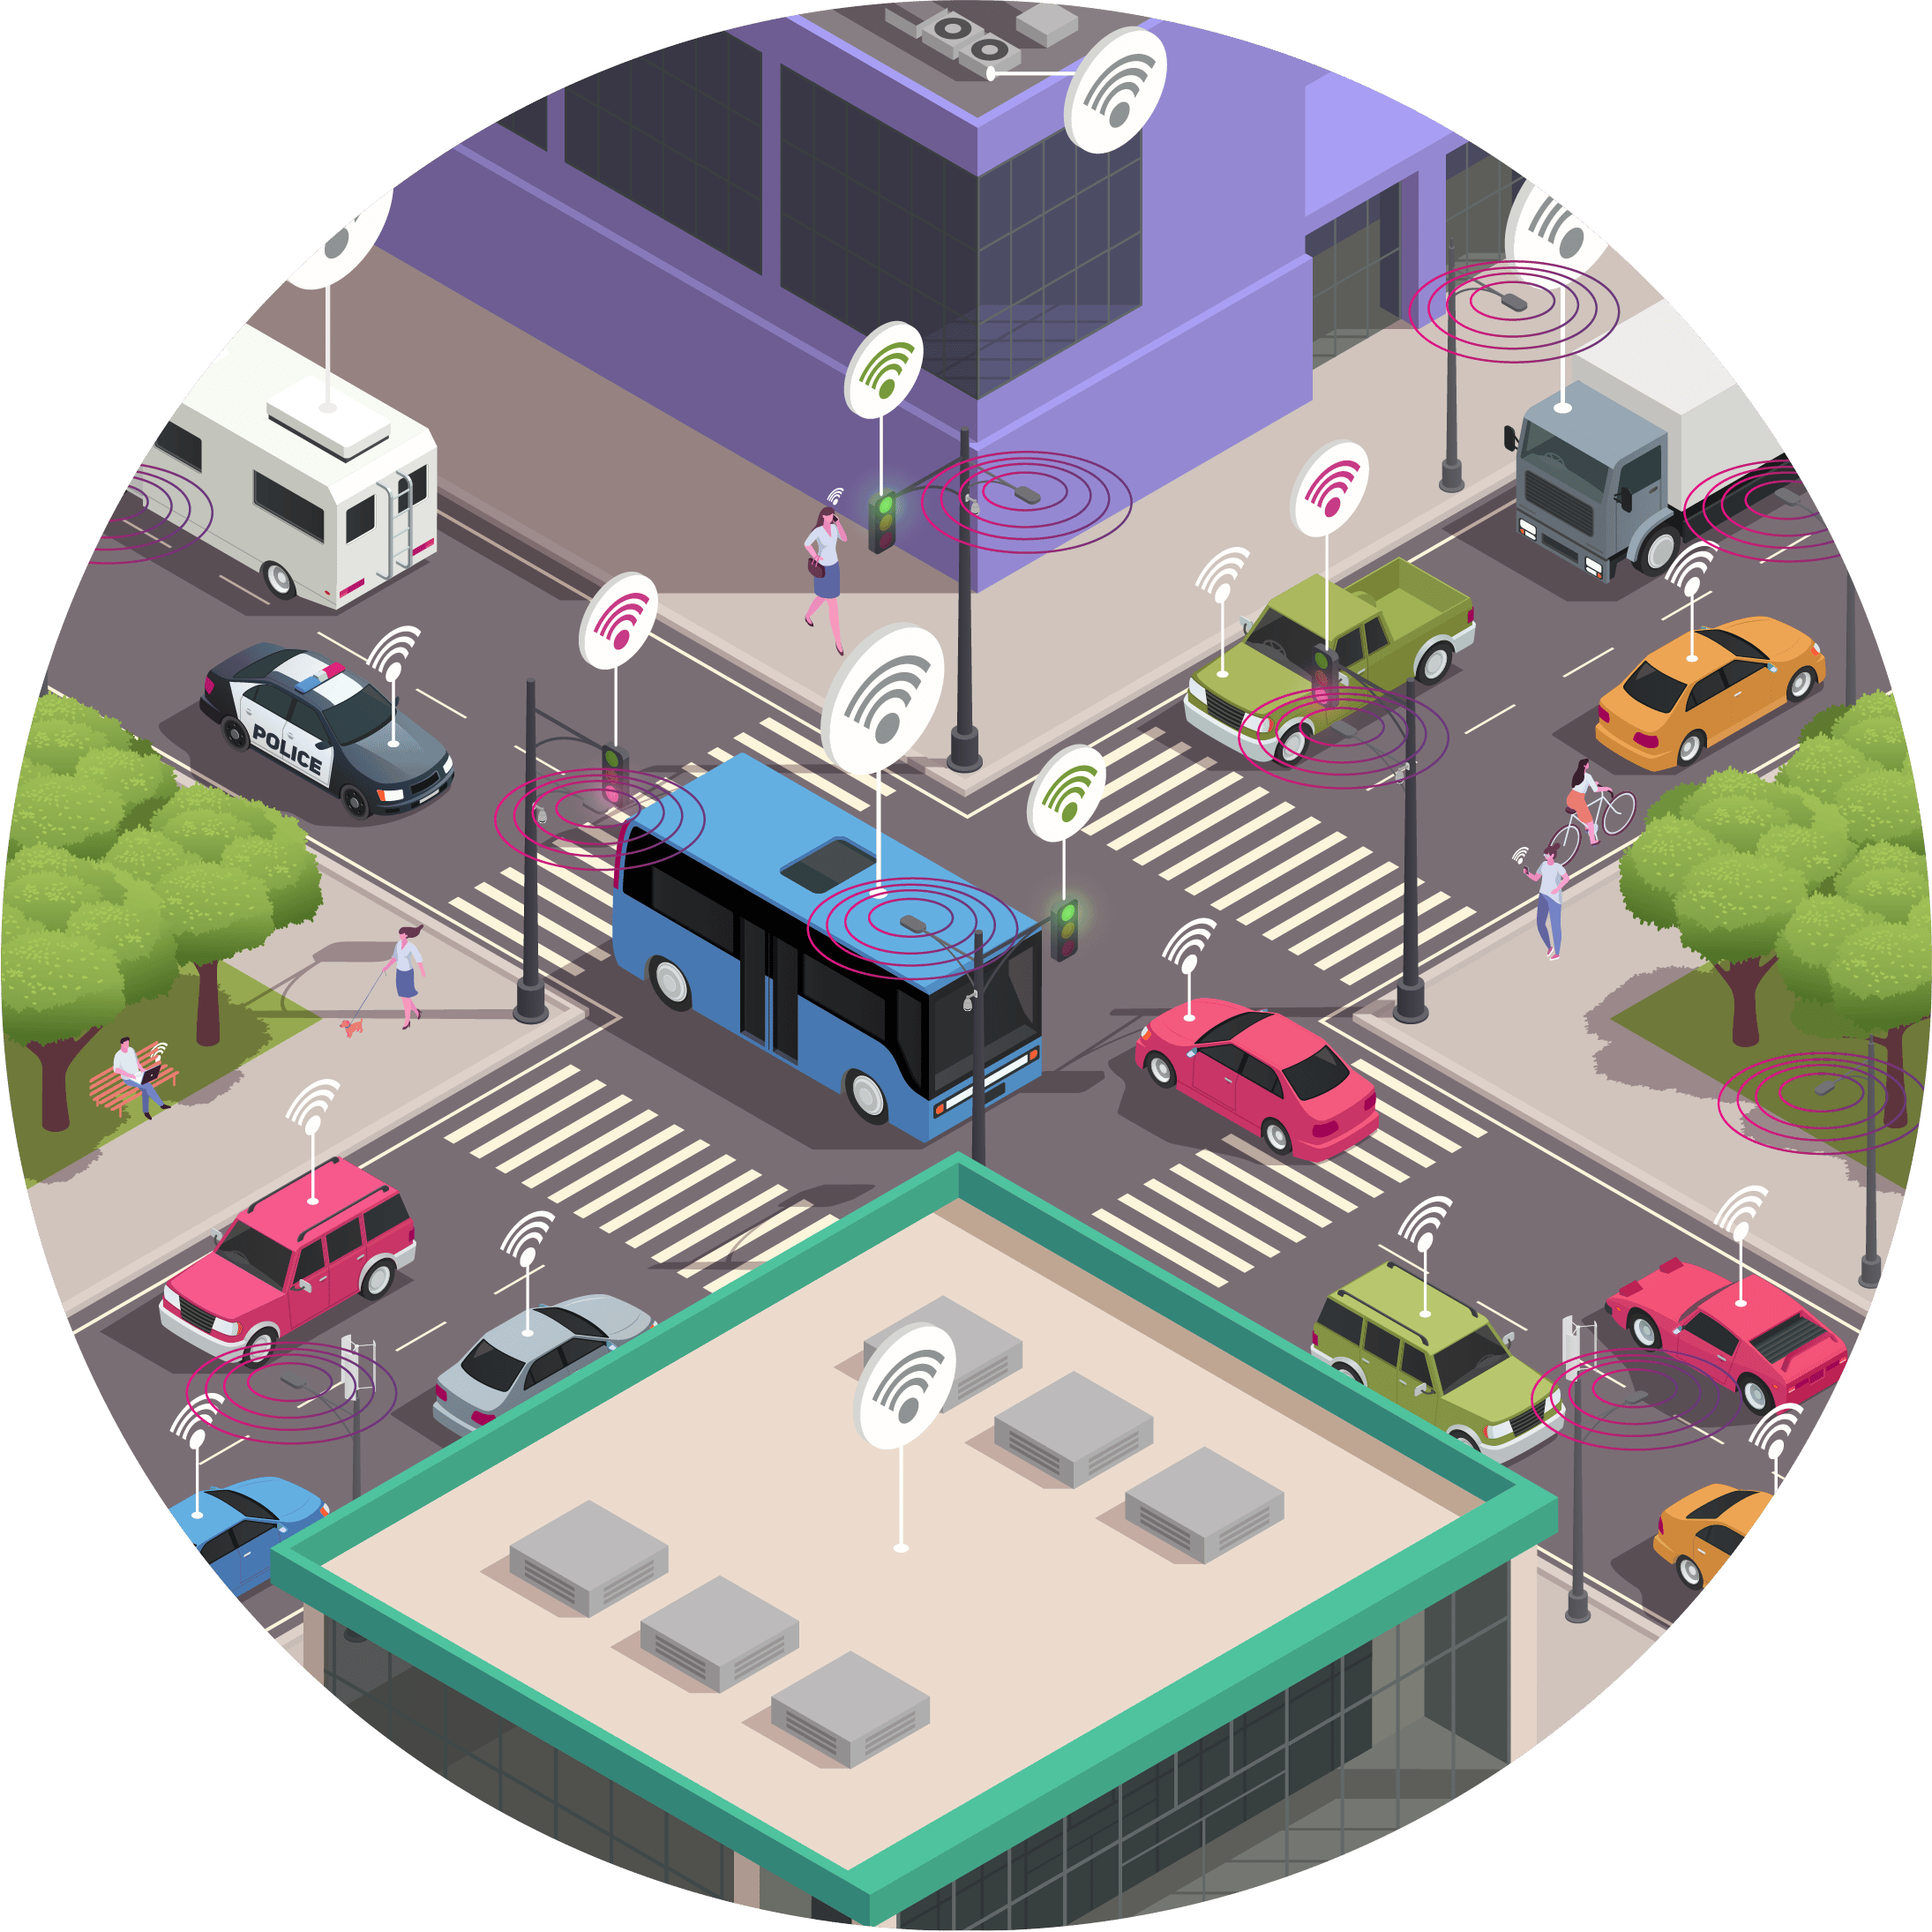 A circular image that shows an illustration of an intersection in a connected Smart City